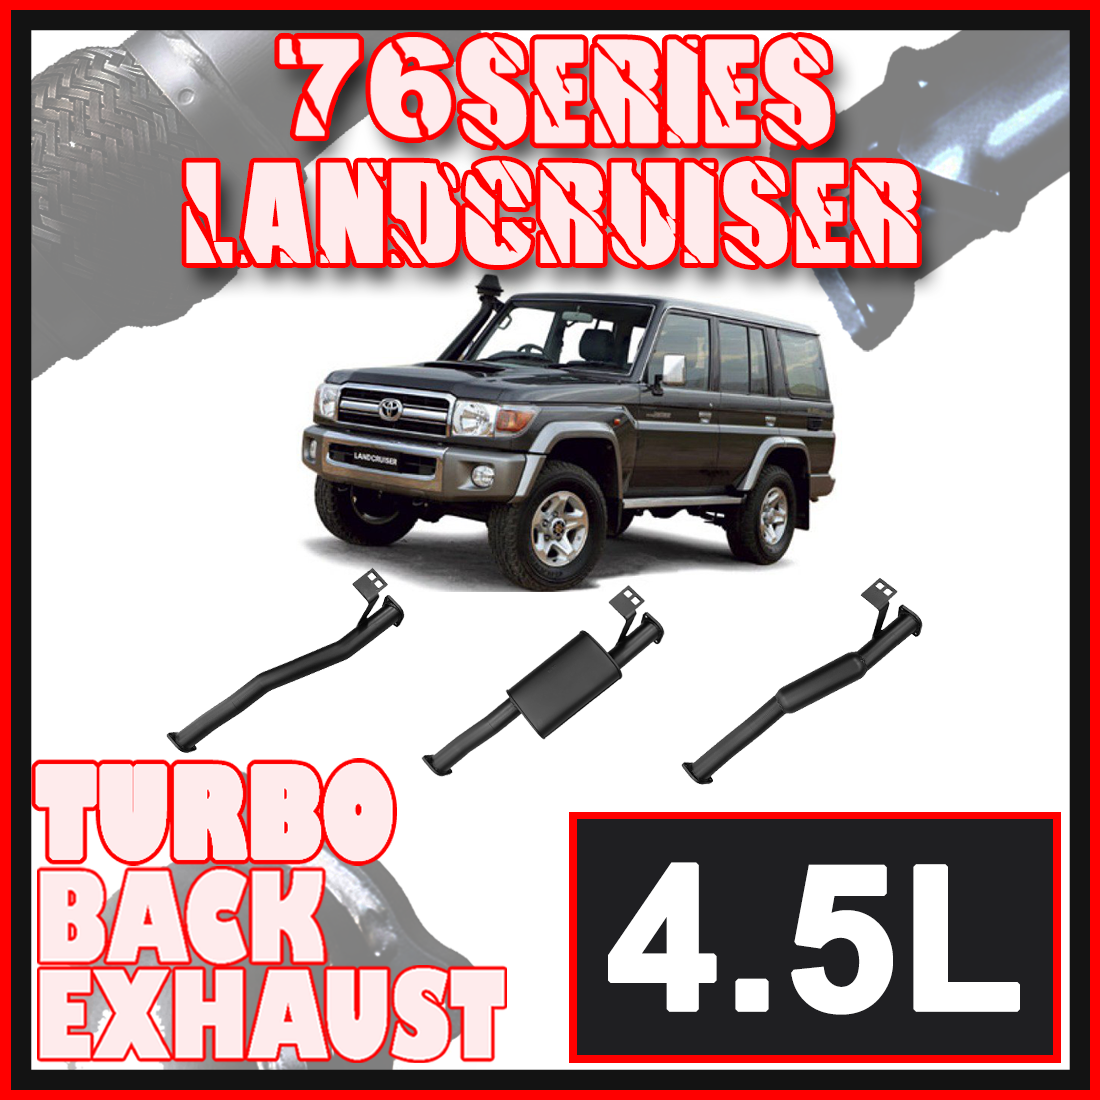 Toyota Landcruiser Exhaust 76 Series Wagon 3" Turbo Back Systems image